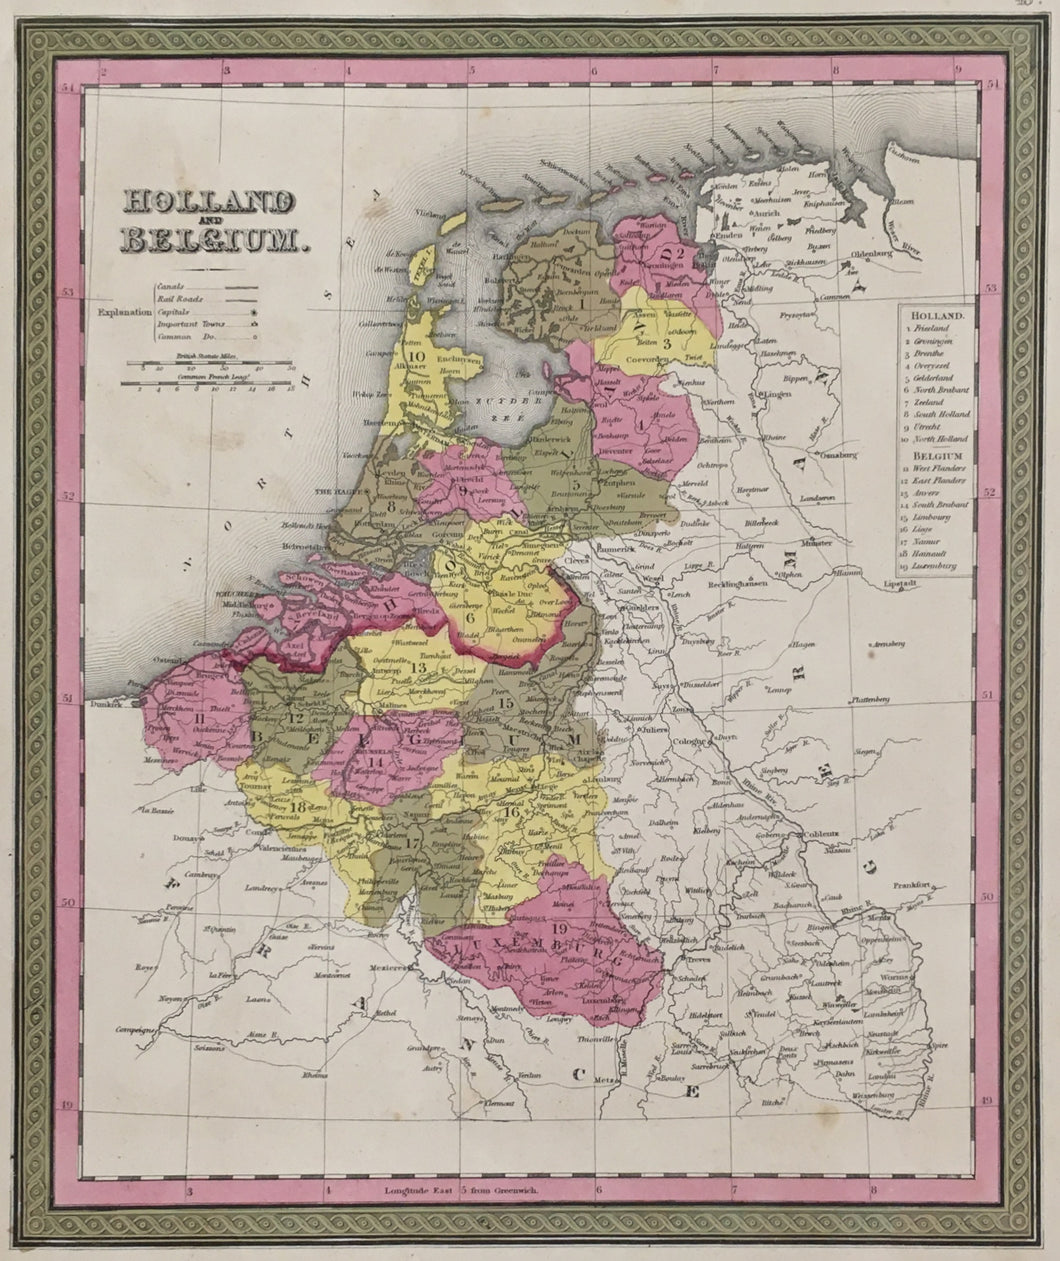 Tanner, Henry S. “Holland and Belgium.”  [Netherlands] 1847